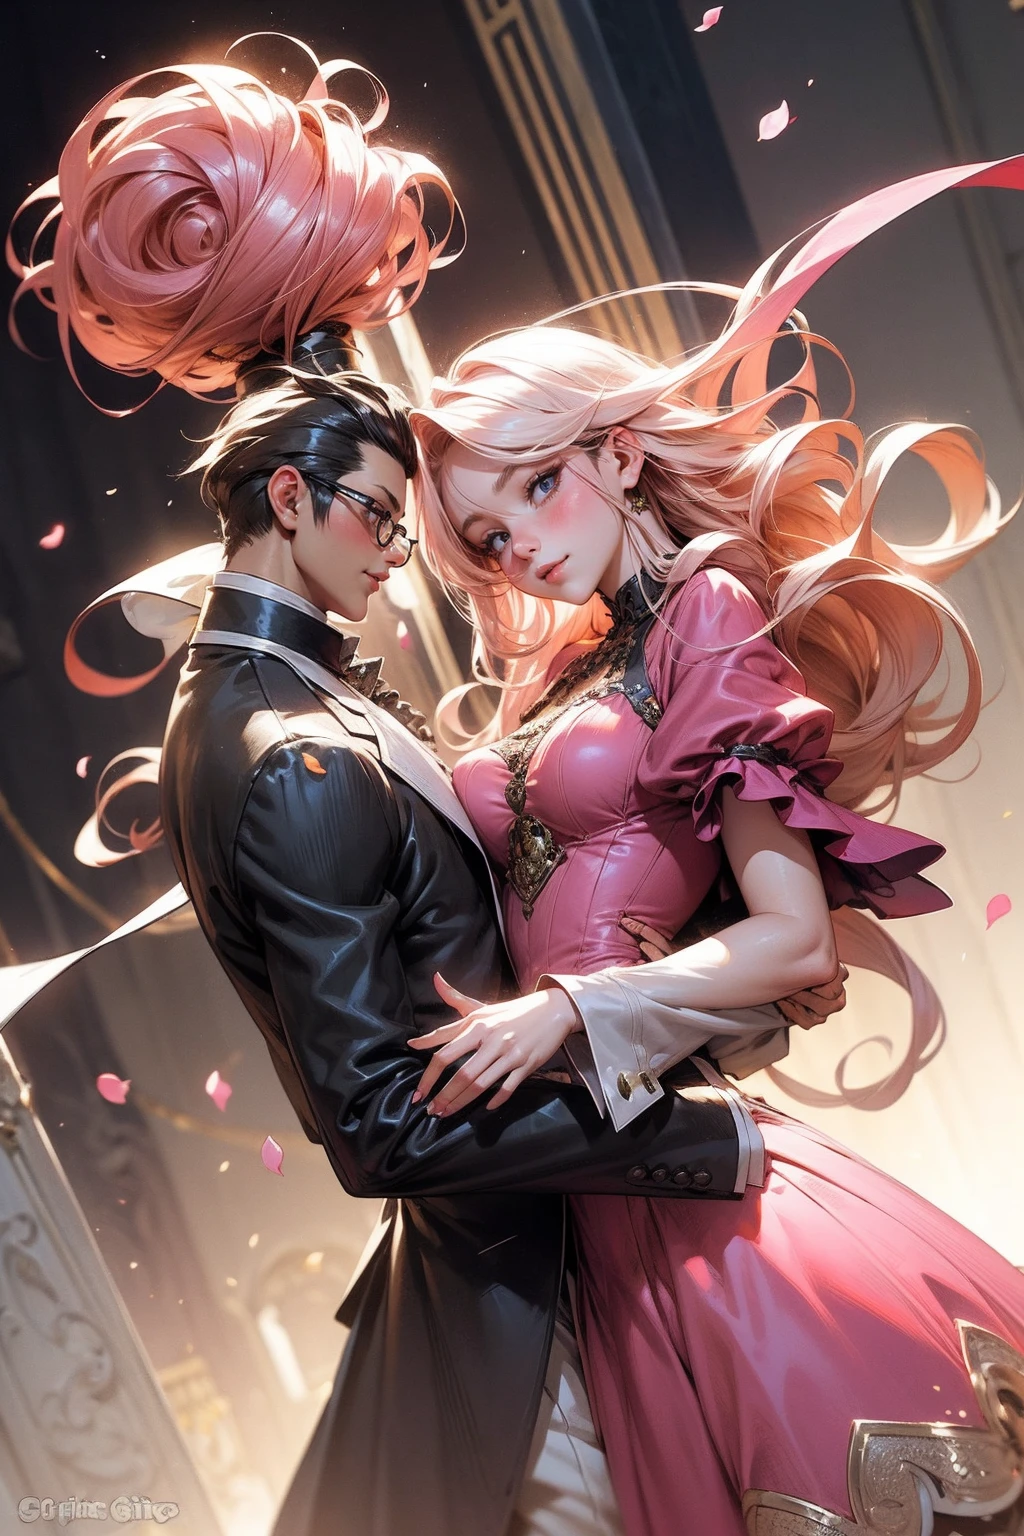 Anime girl tuxedo with curly rose gold hair and round gold glasses, rose gold eyes. Guviz style art, attractive detailed art style, Charlie Bowater Style, 1 7 - year - old cute anime girl, detailed manga style, detailed anime character art, germ of art. High detail, stunning manga art style. Rose dress. (pink dress) . Wearing rose gold Victorian clothing.